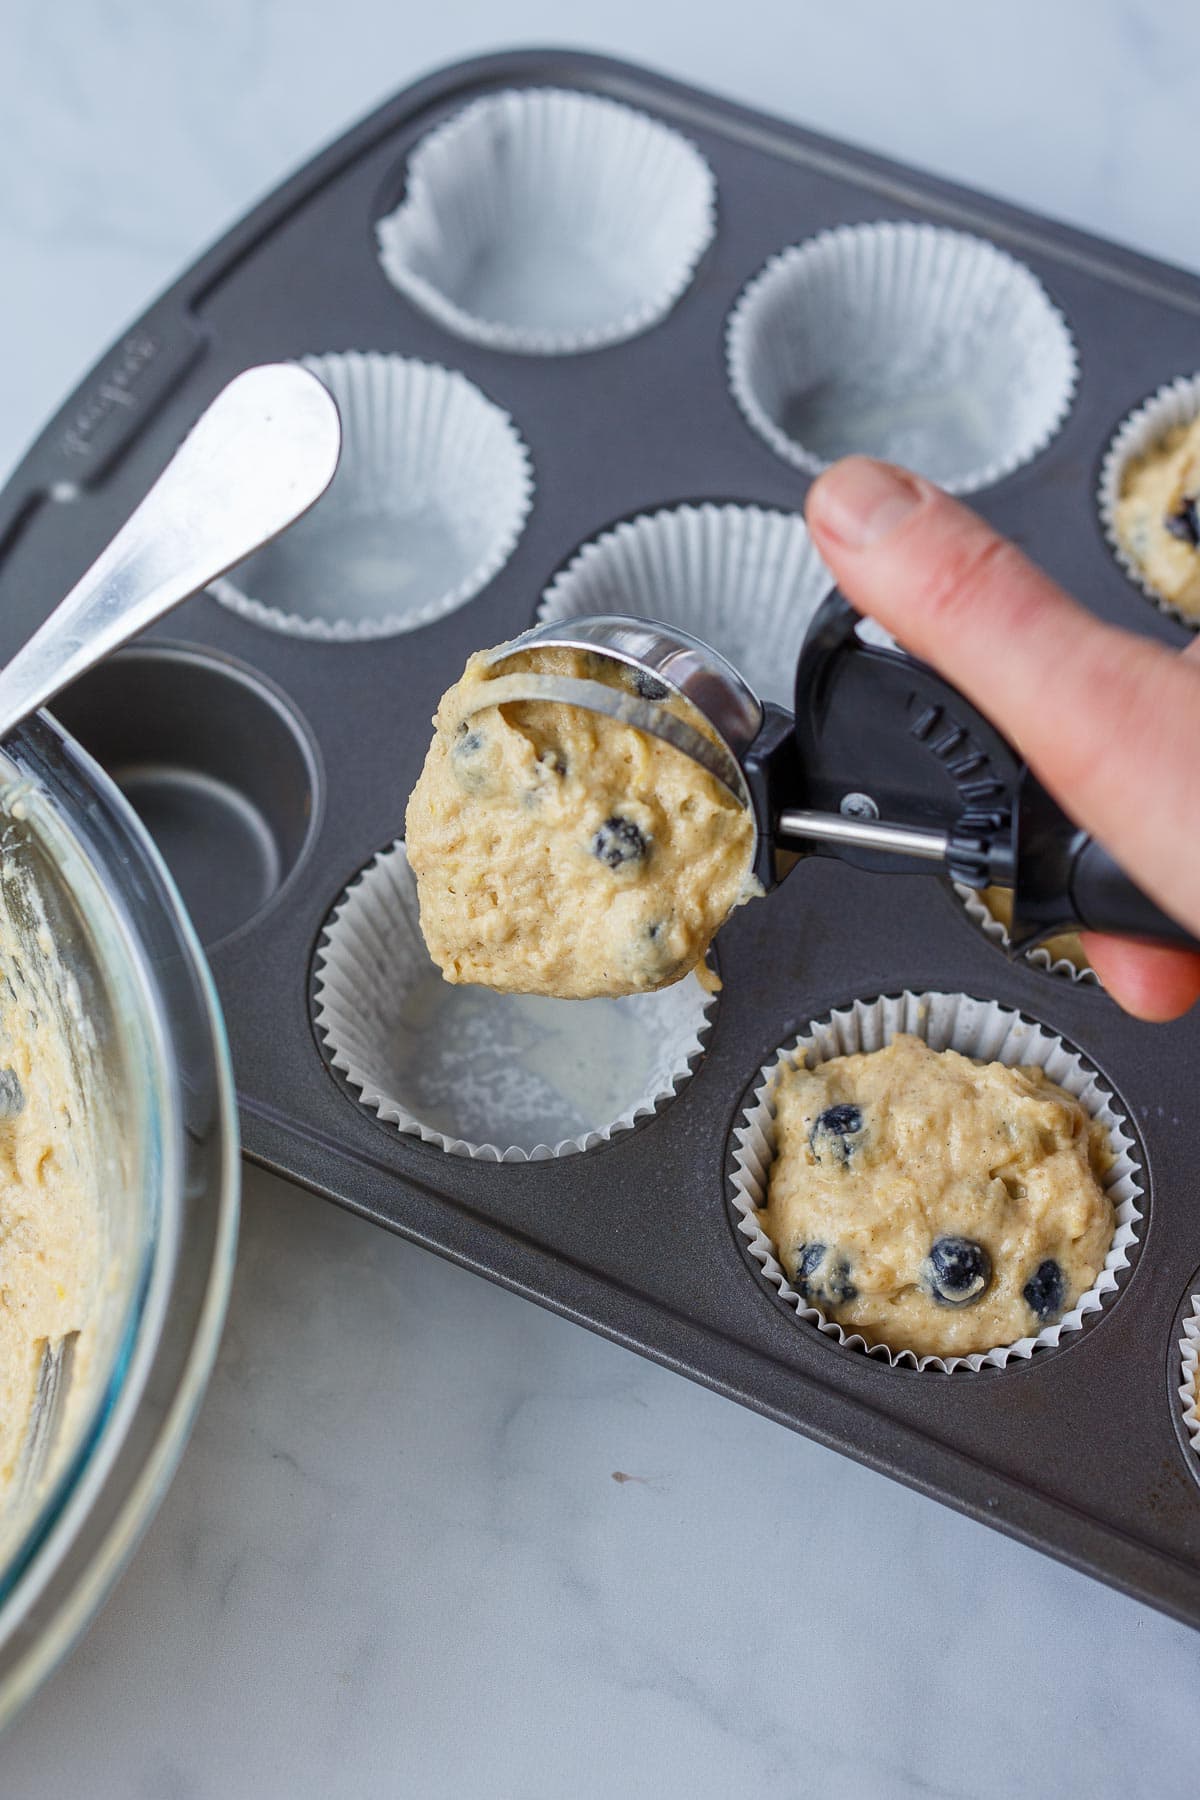 Pour the batter into muffin cups.